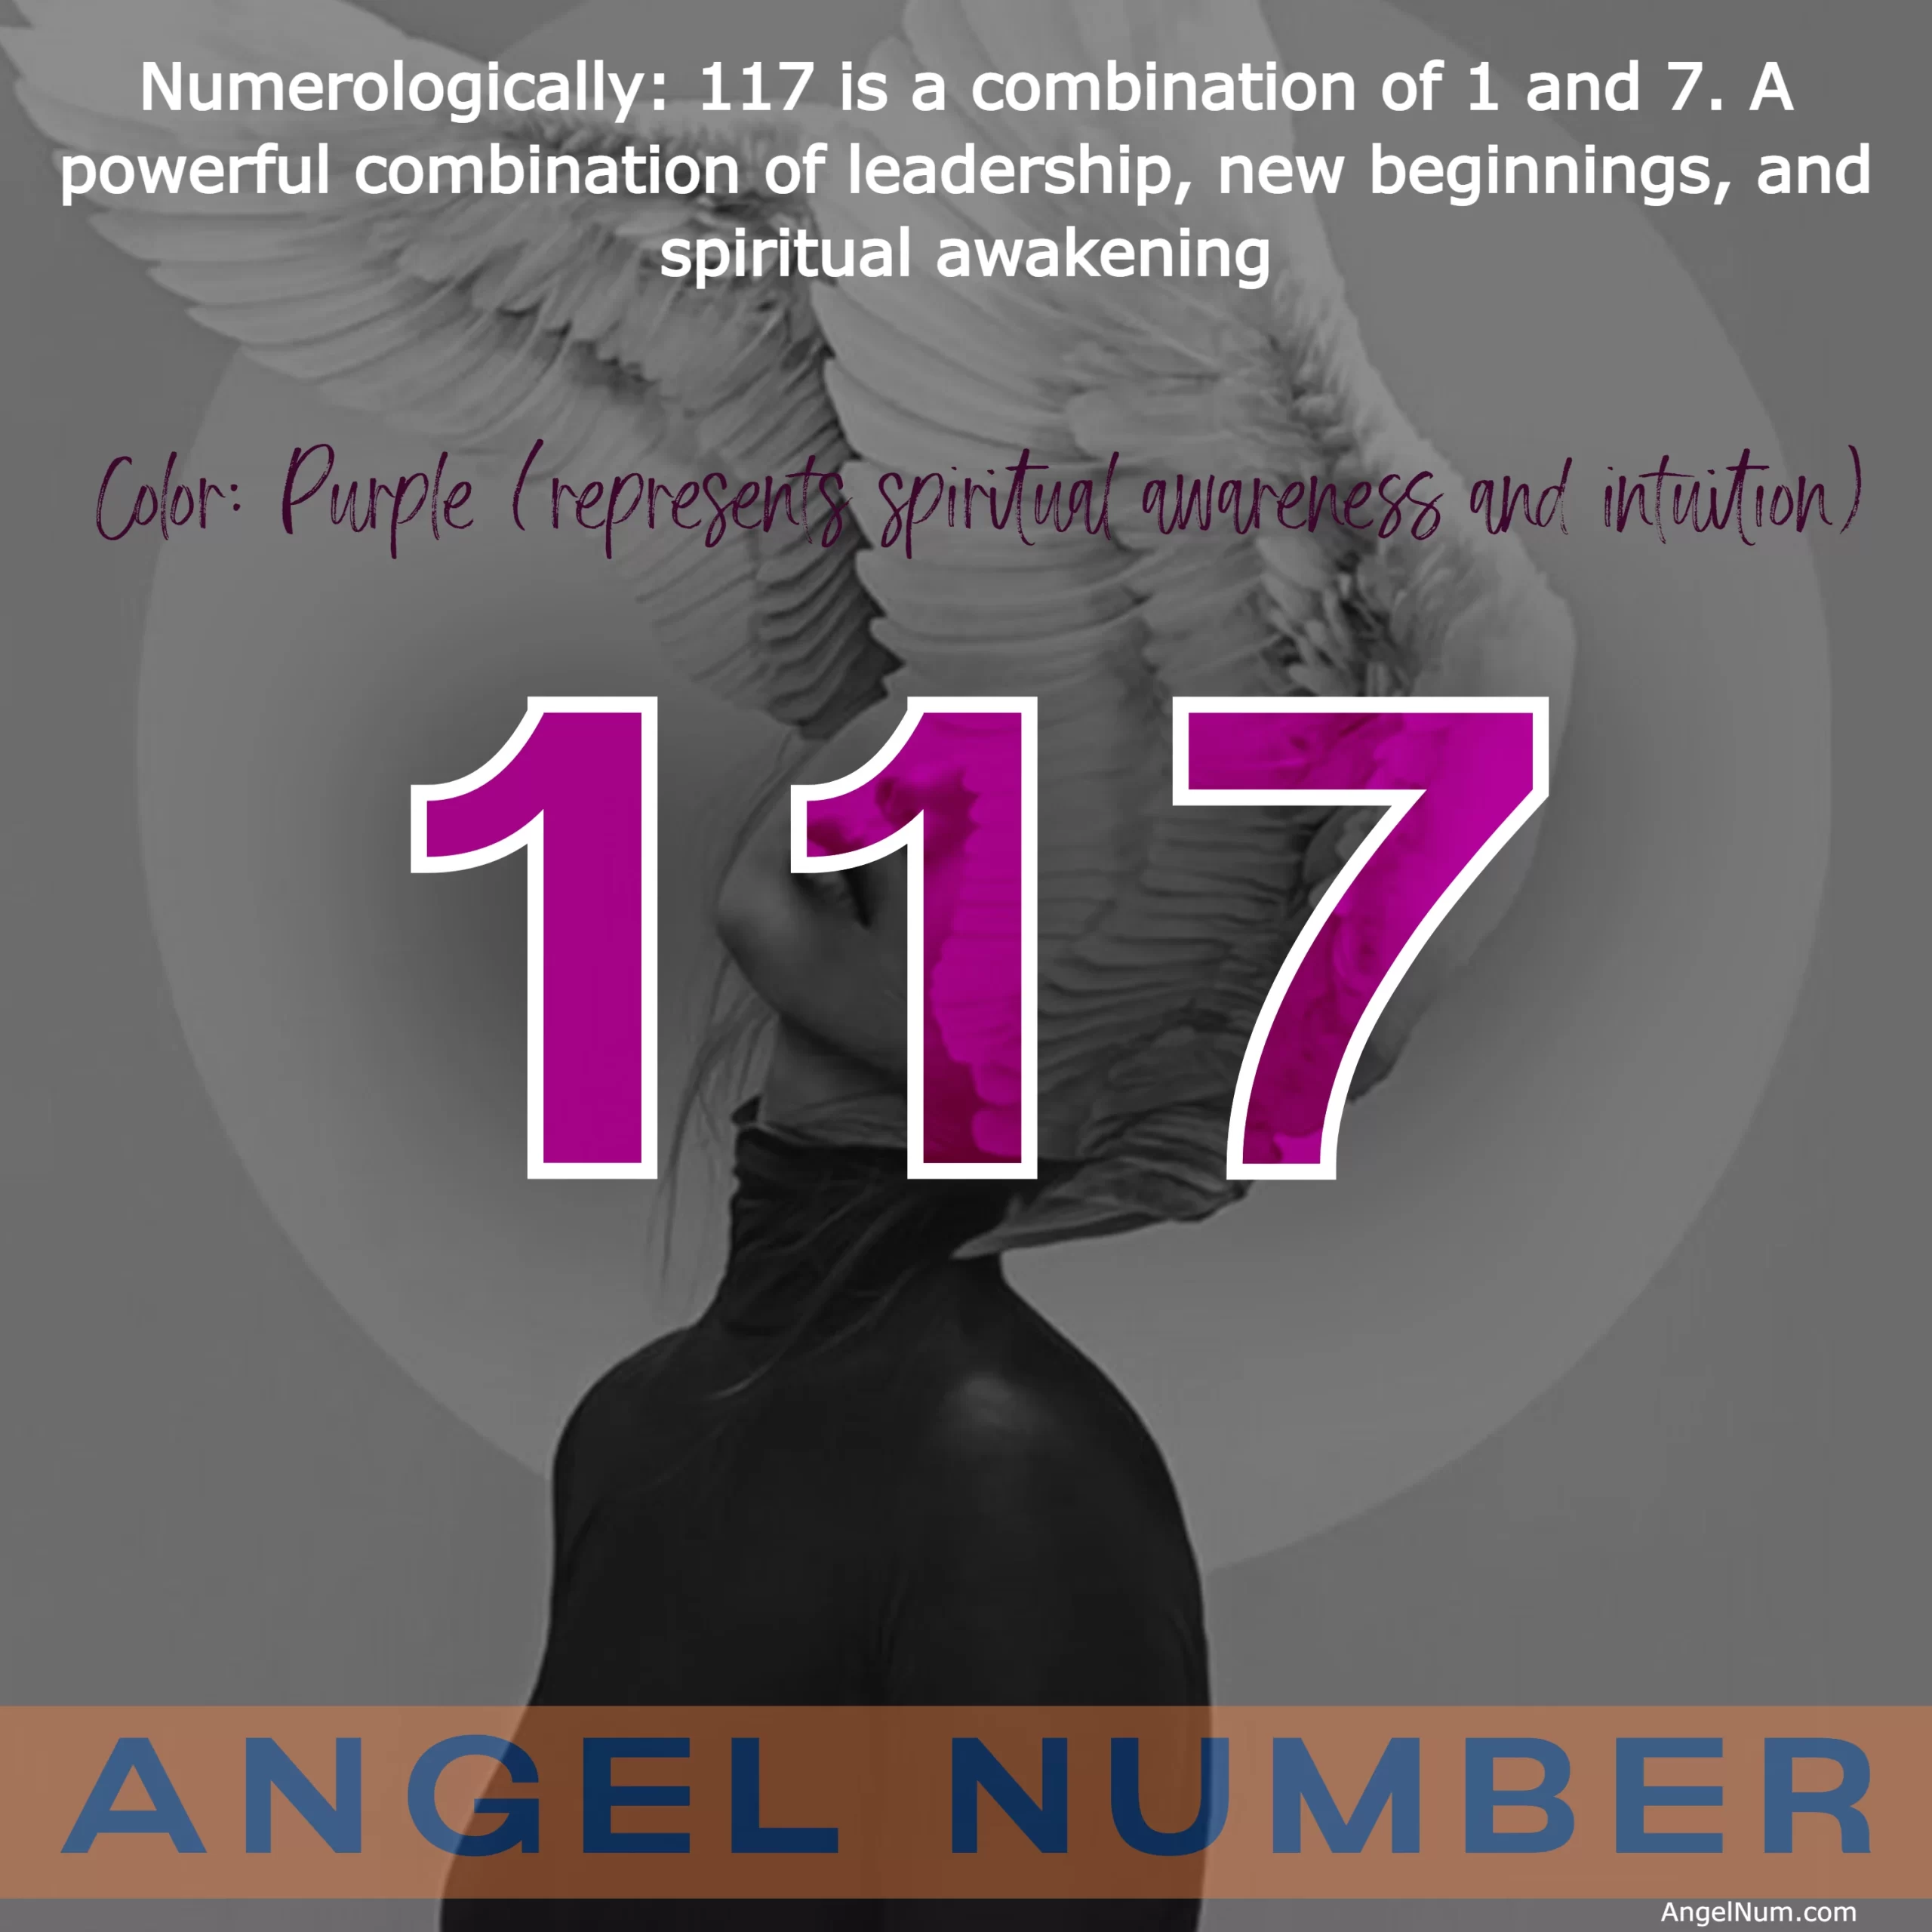 Angel Number 117: The Spiritual Significance and Meaning